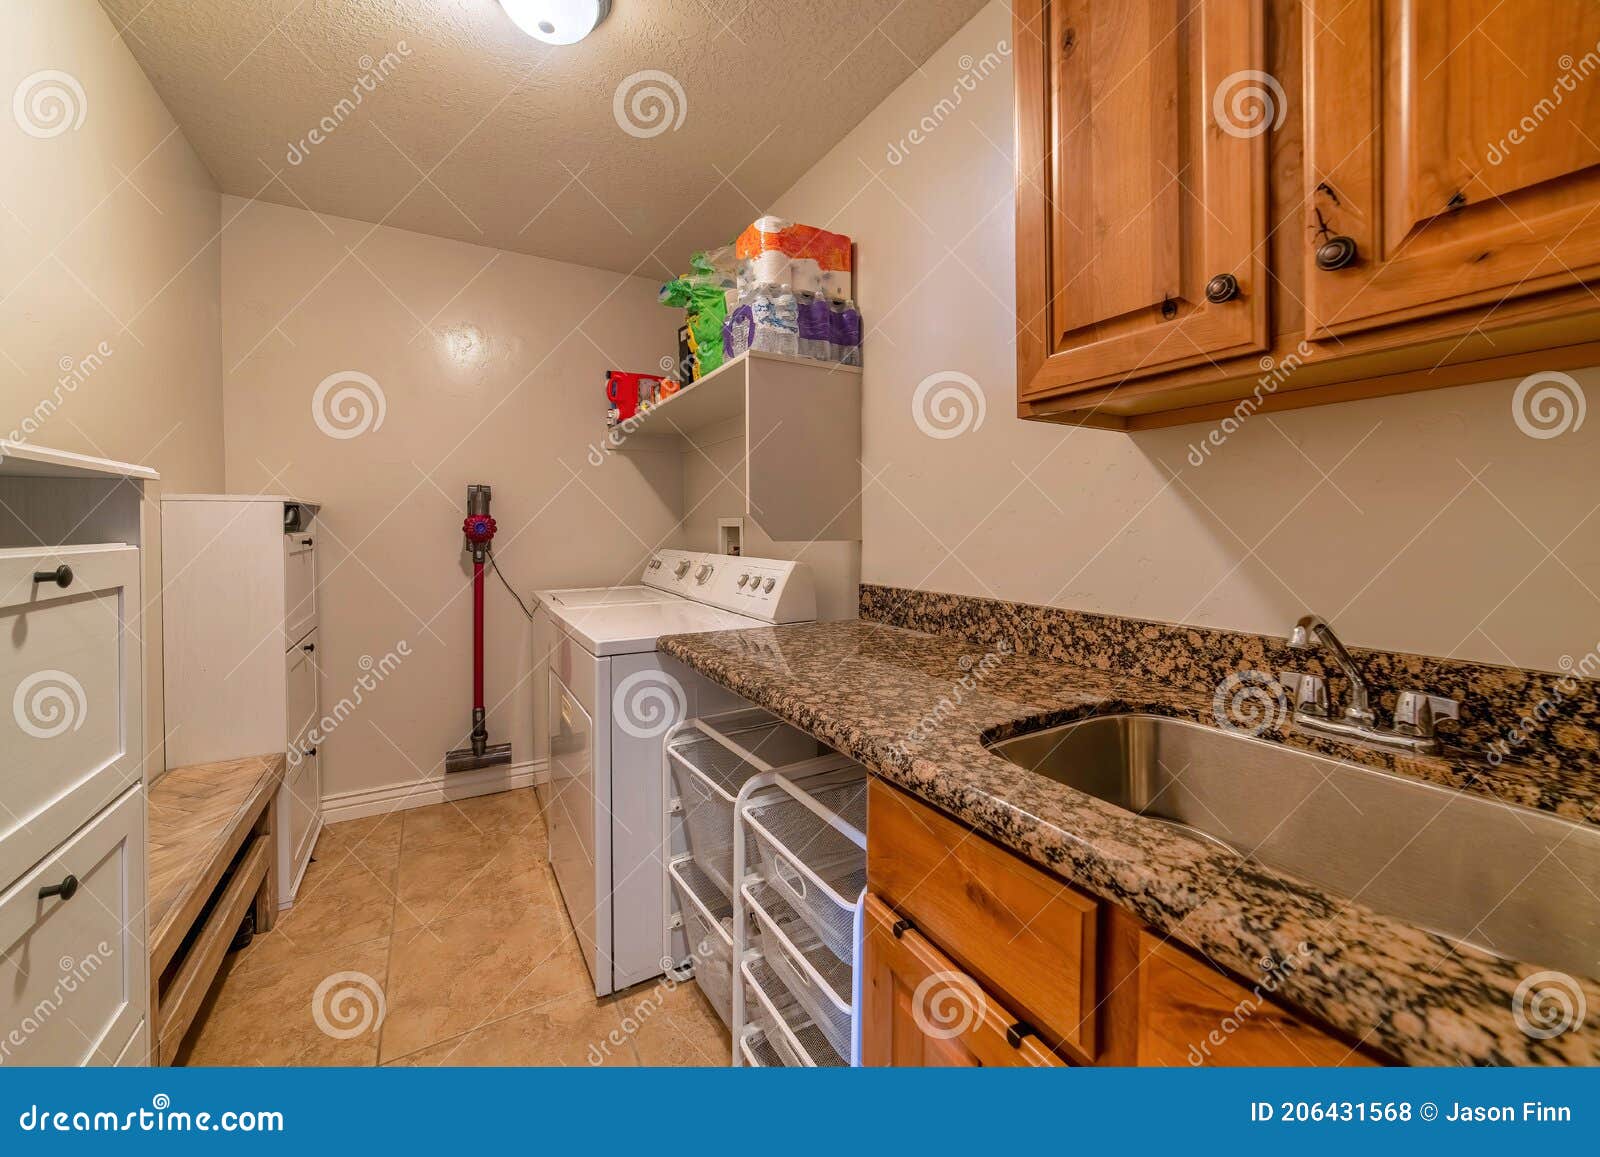 Laundry Room of Home with Sink Washing Machine Dryer Cabinets and